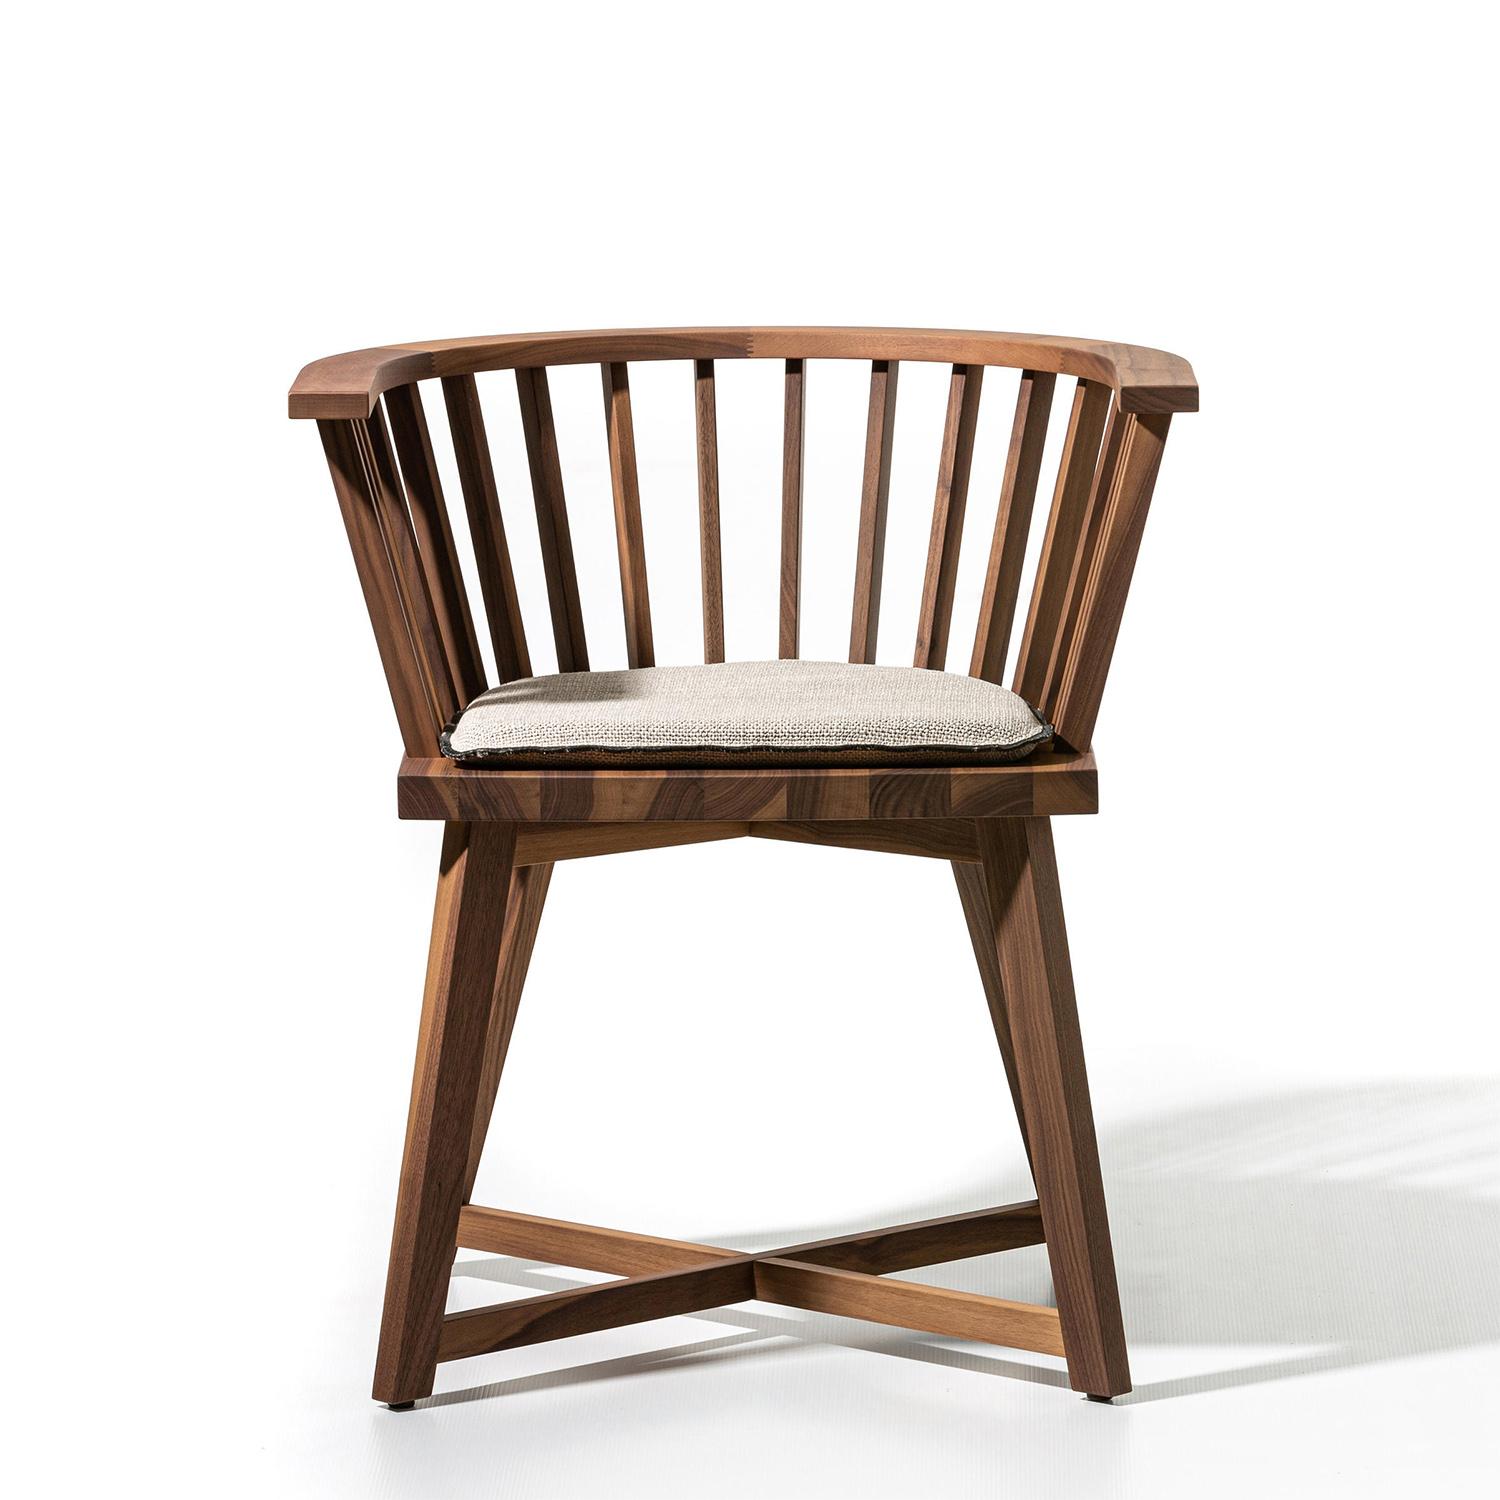 Chair Premia Low Walnut with all structure in 
solid walnut wood, with cushion seat included.